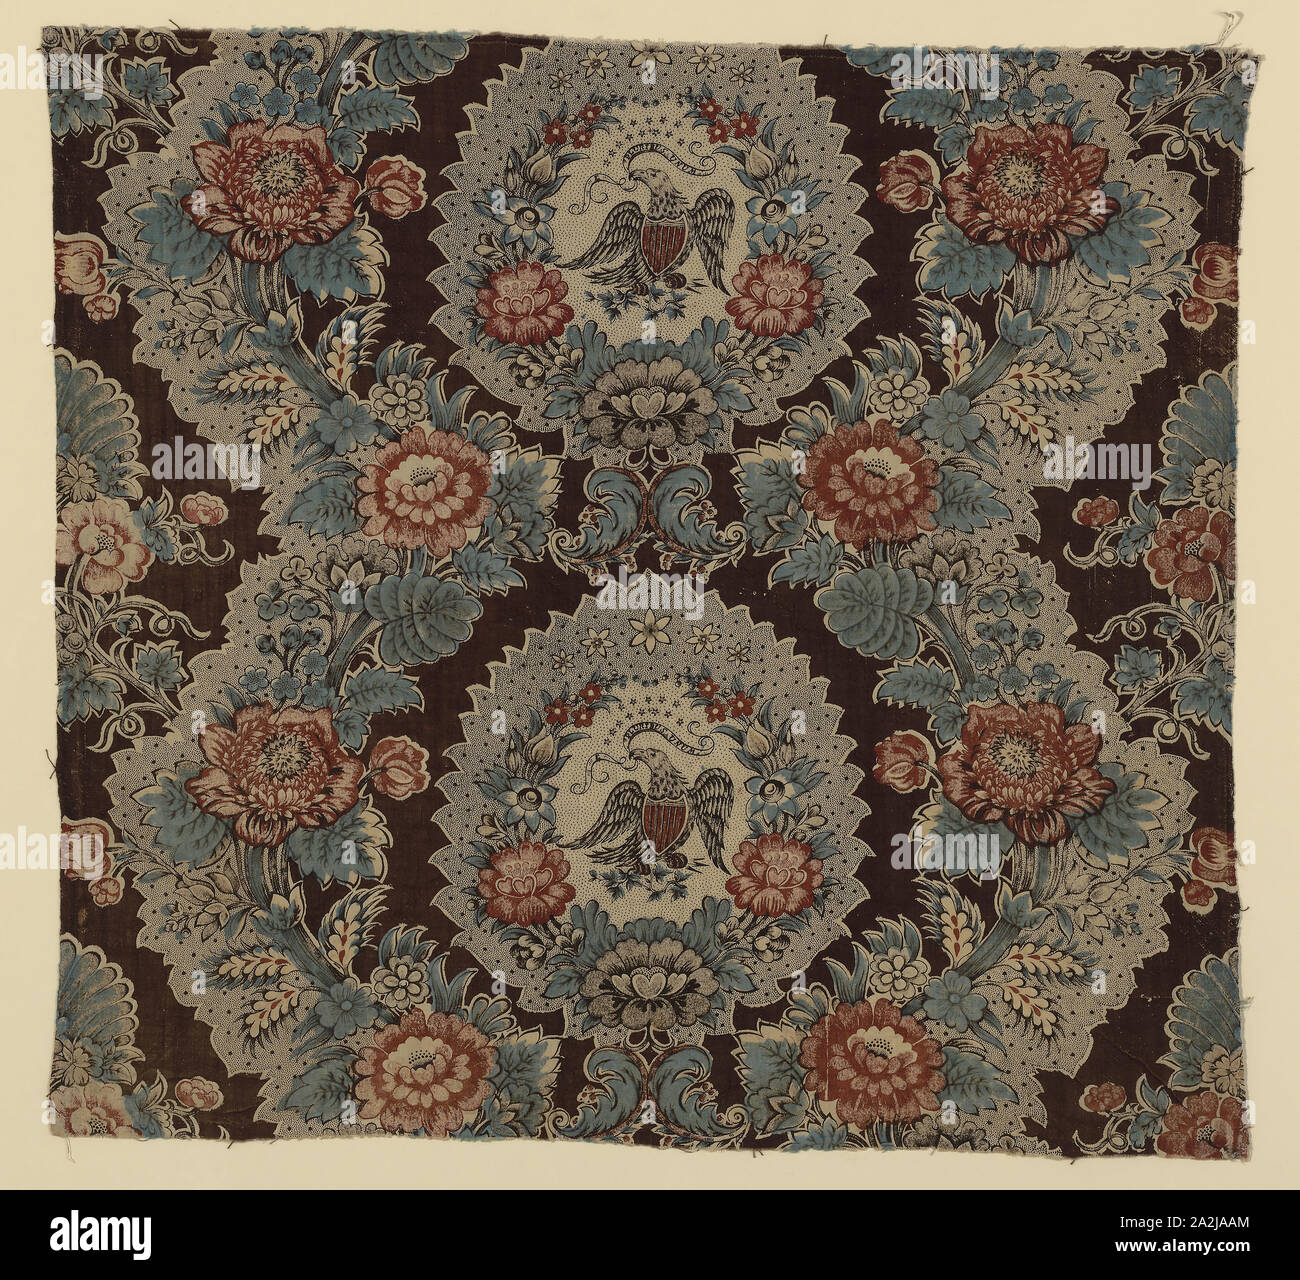 E Pluribus Unum (From the Many, One) (Furnishing Fabric), 1825/35, England, Manchester, Manchester, Cotton, plain weave, engraved roller printed, glazed, 58.6 x 62.8 cm (23 x 24 3/4 in Stock Photo